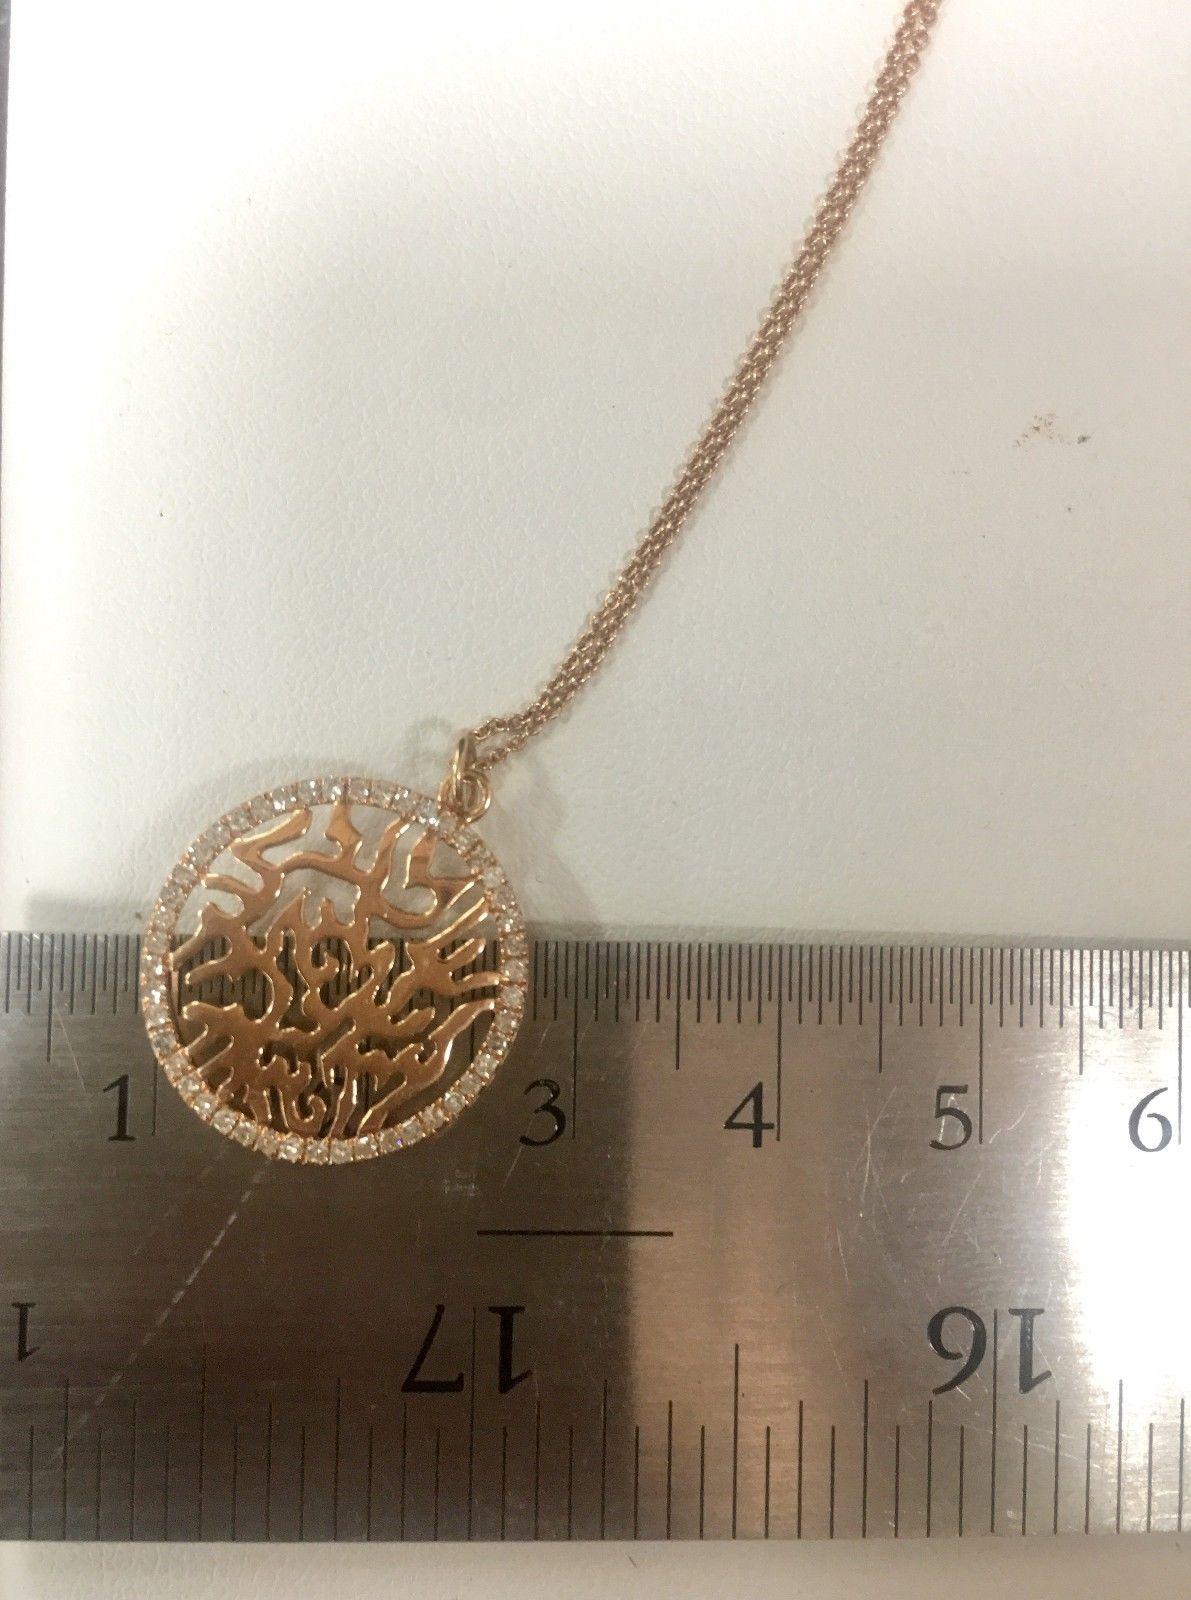 14k Rose Unique Gold Circle Necklace with Round Natural Diamonds V0191